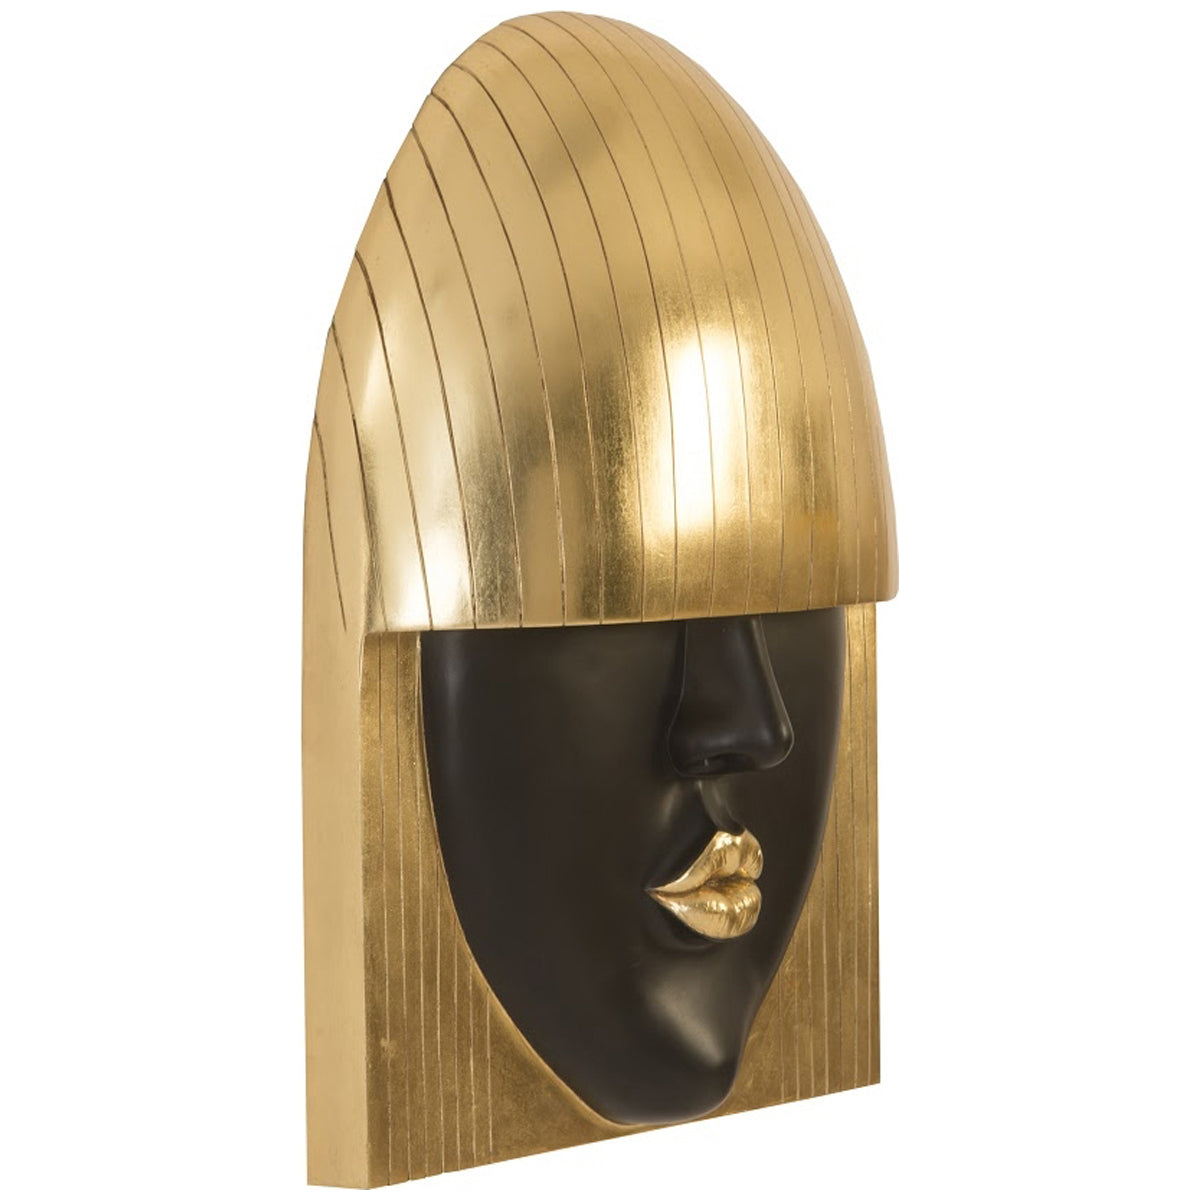 Phillips Collection Fashion Faces Kiss Black and Gold Wall Art